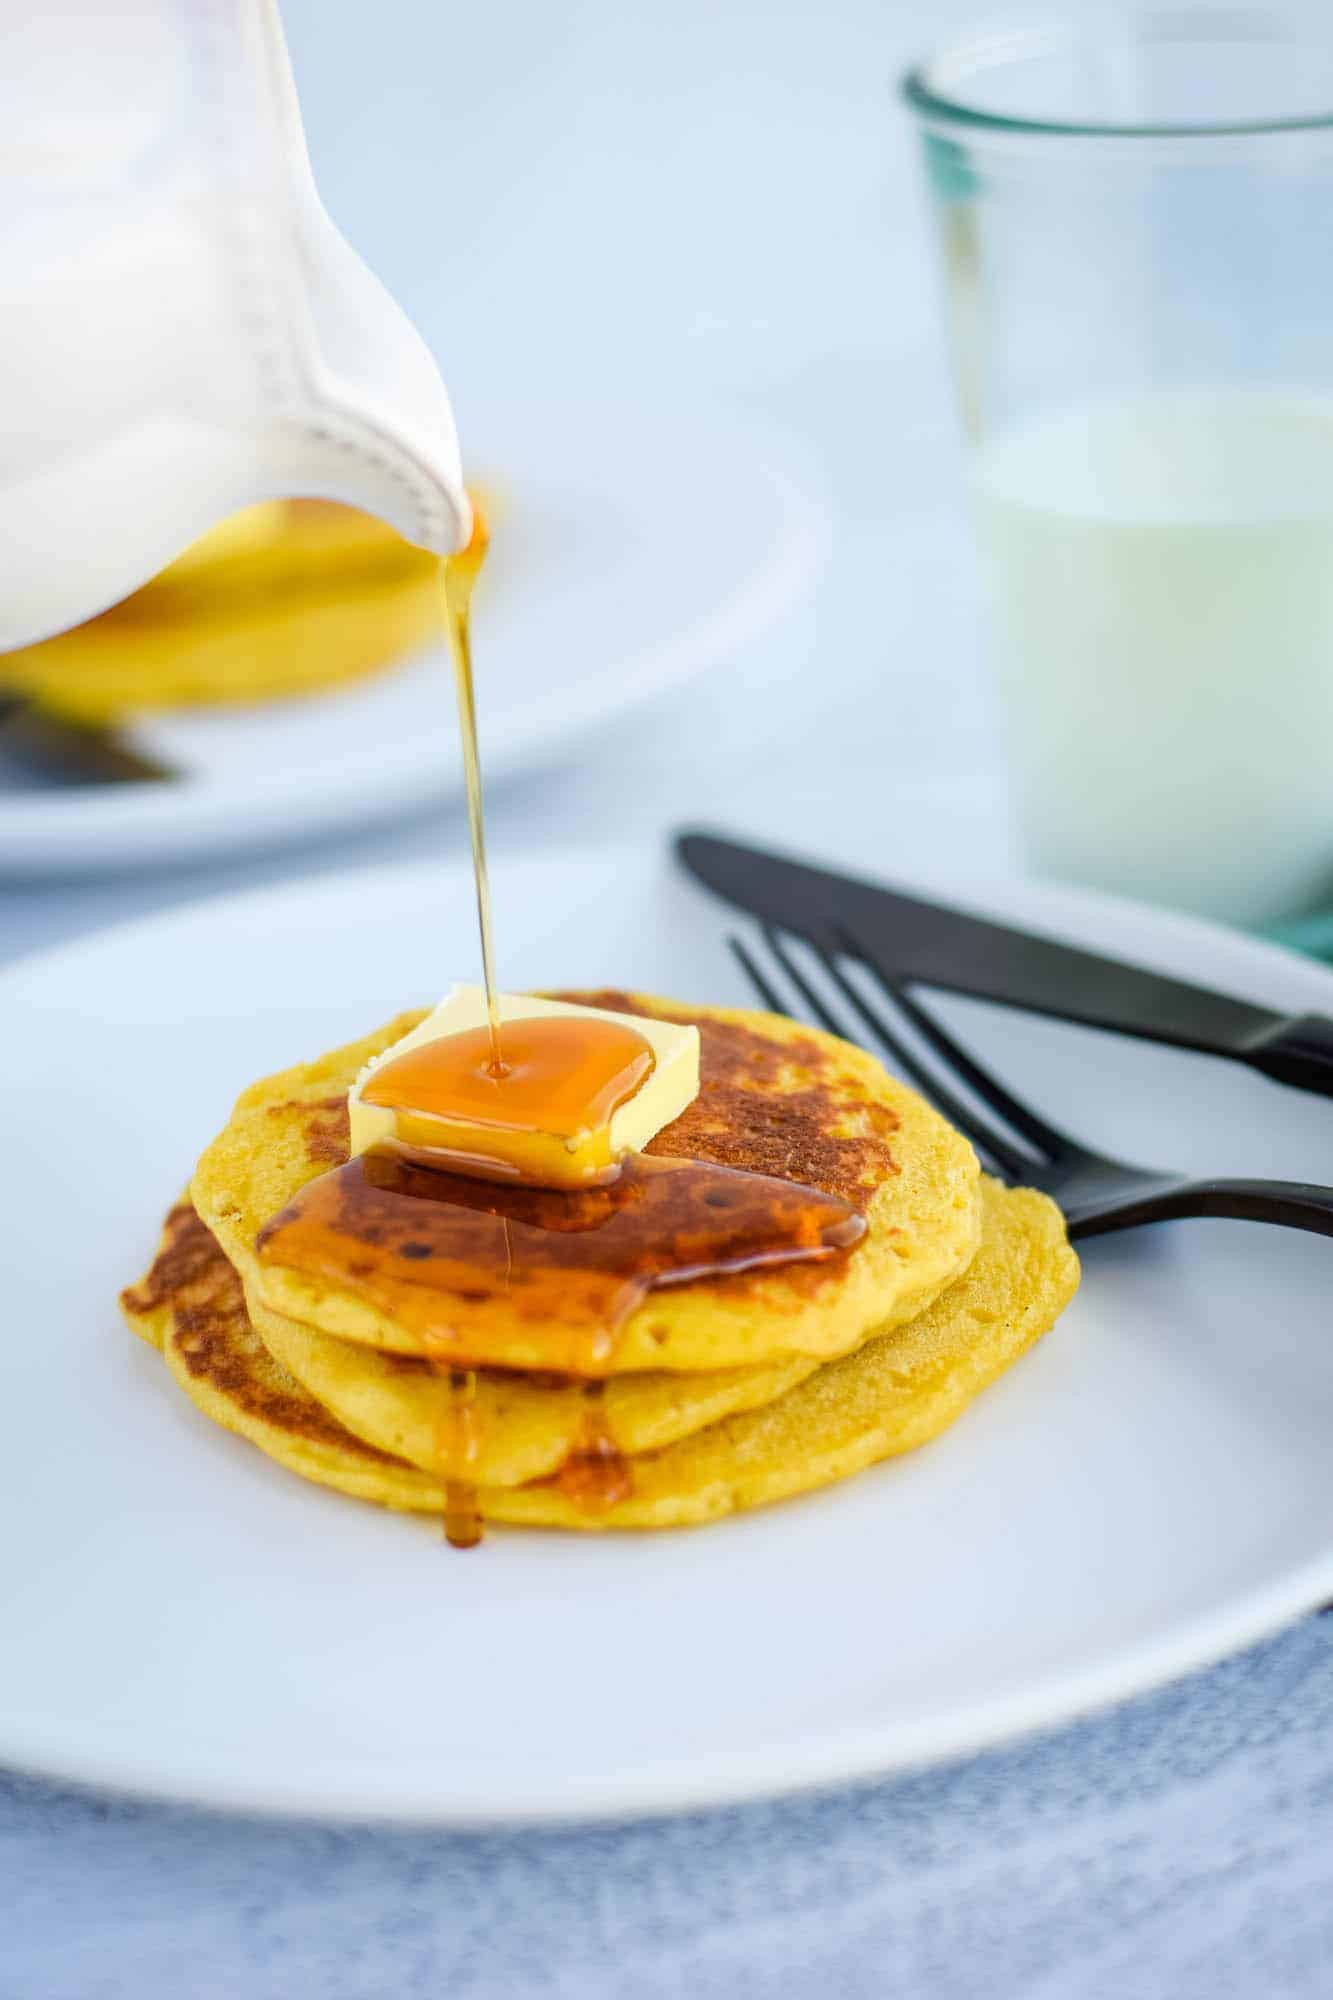 pouring maple syrup over a stack of einkorn sourdough pancakes